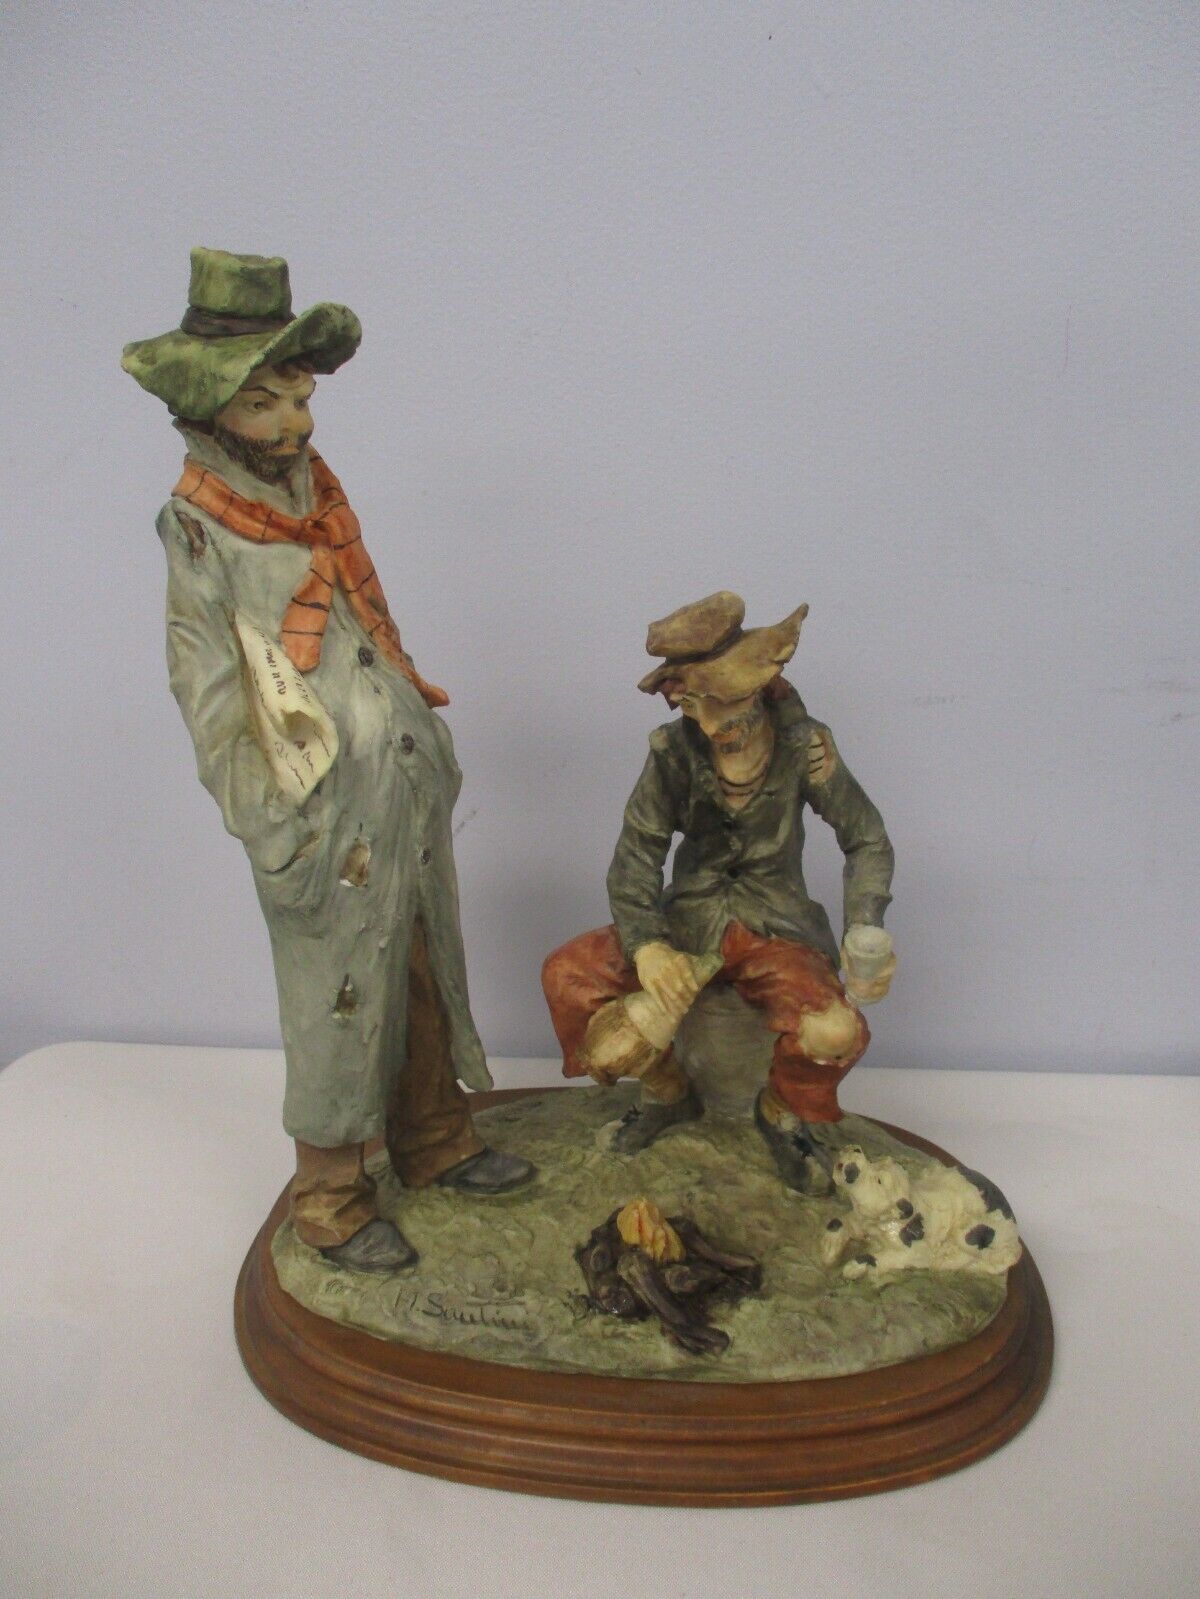 VINTAGE CAPODIMONTE SIGNED A. SANTINI 2 BUMS DRINKING WINE BY THE CAMPFIRE 13